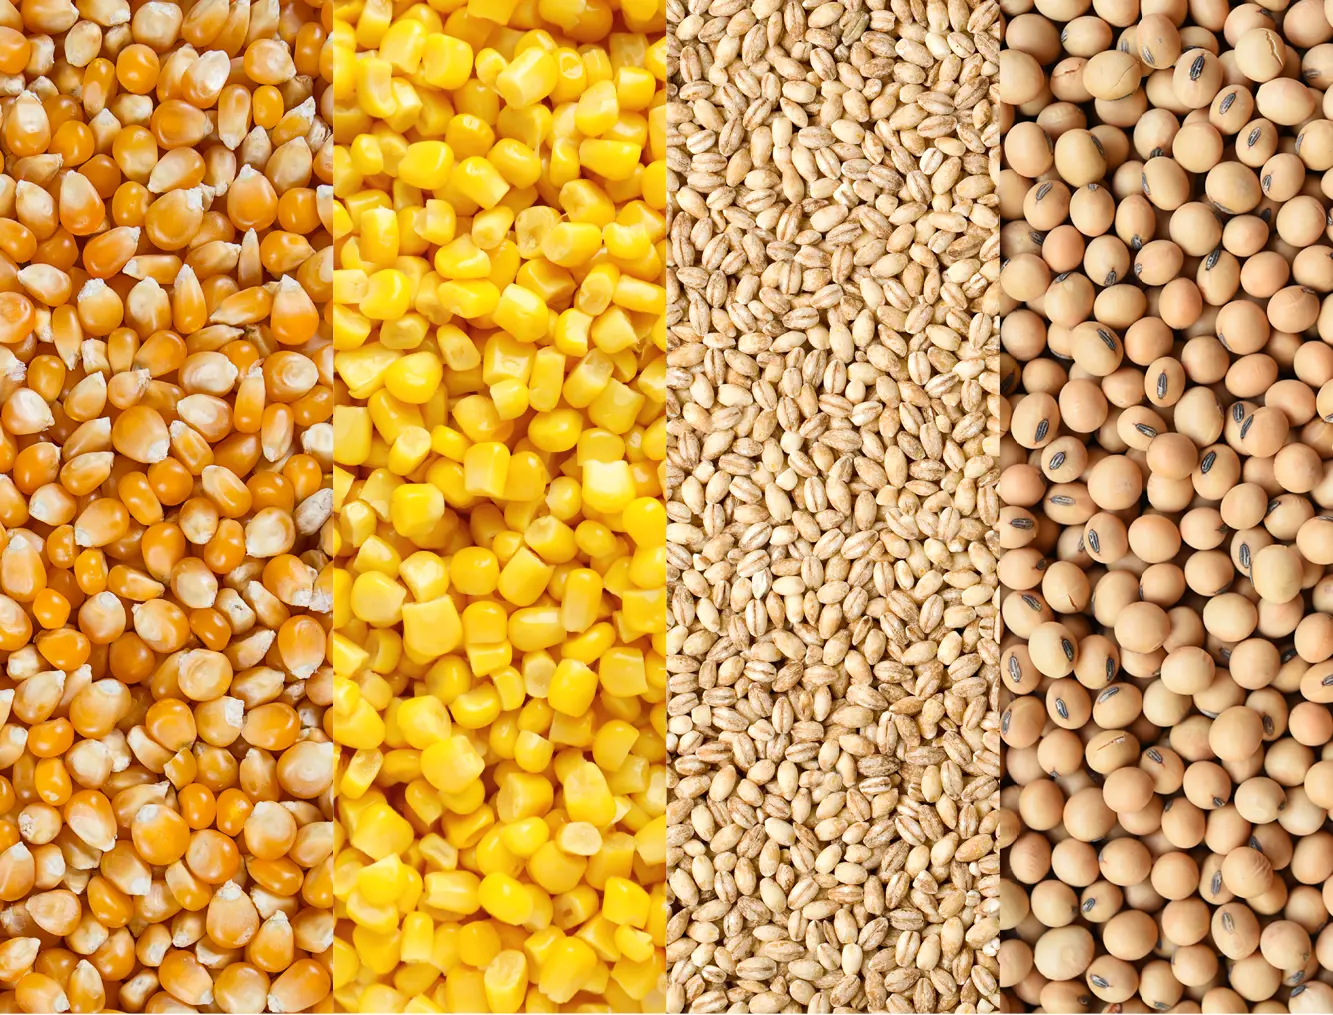 Low-cost processing of dry corn, wet corn, barley, and soybeans